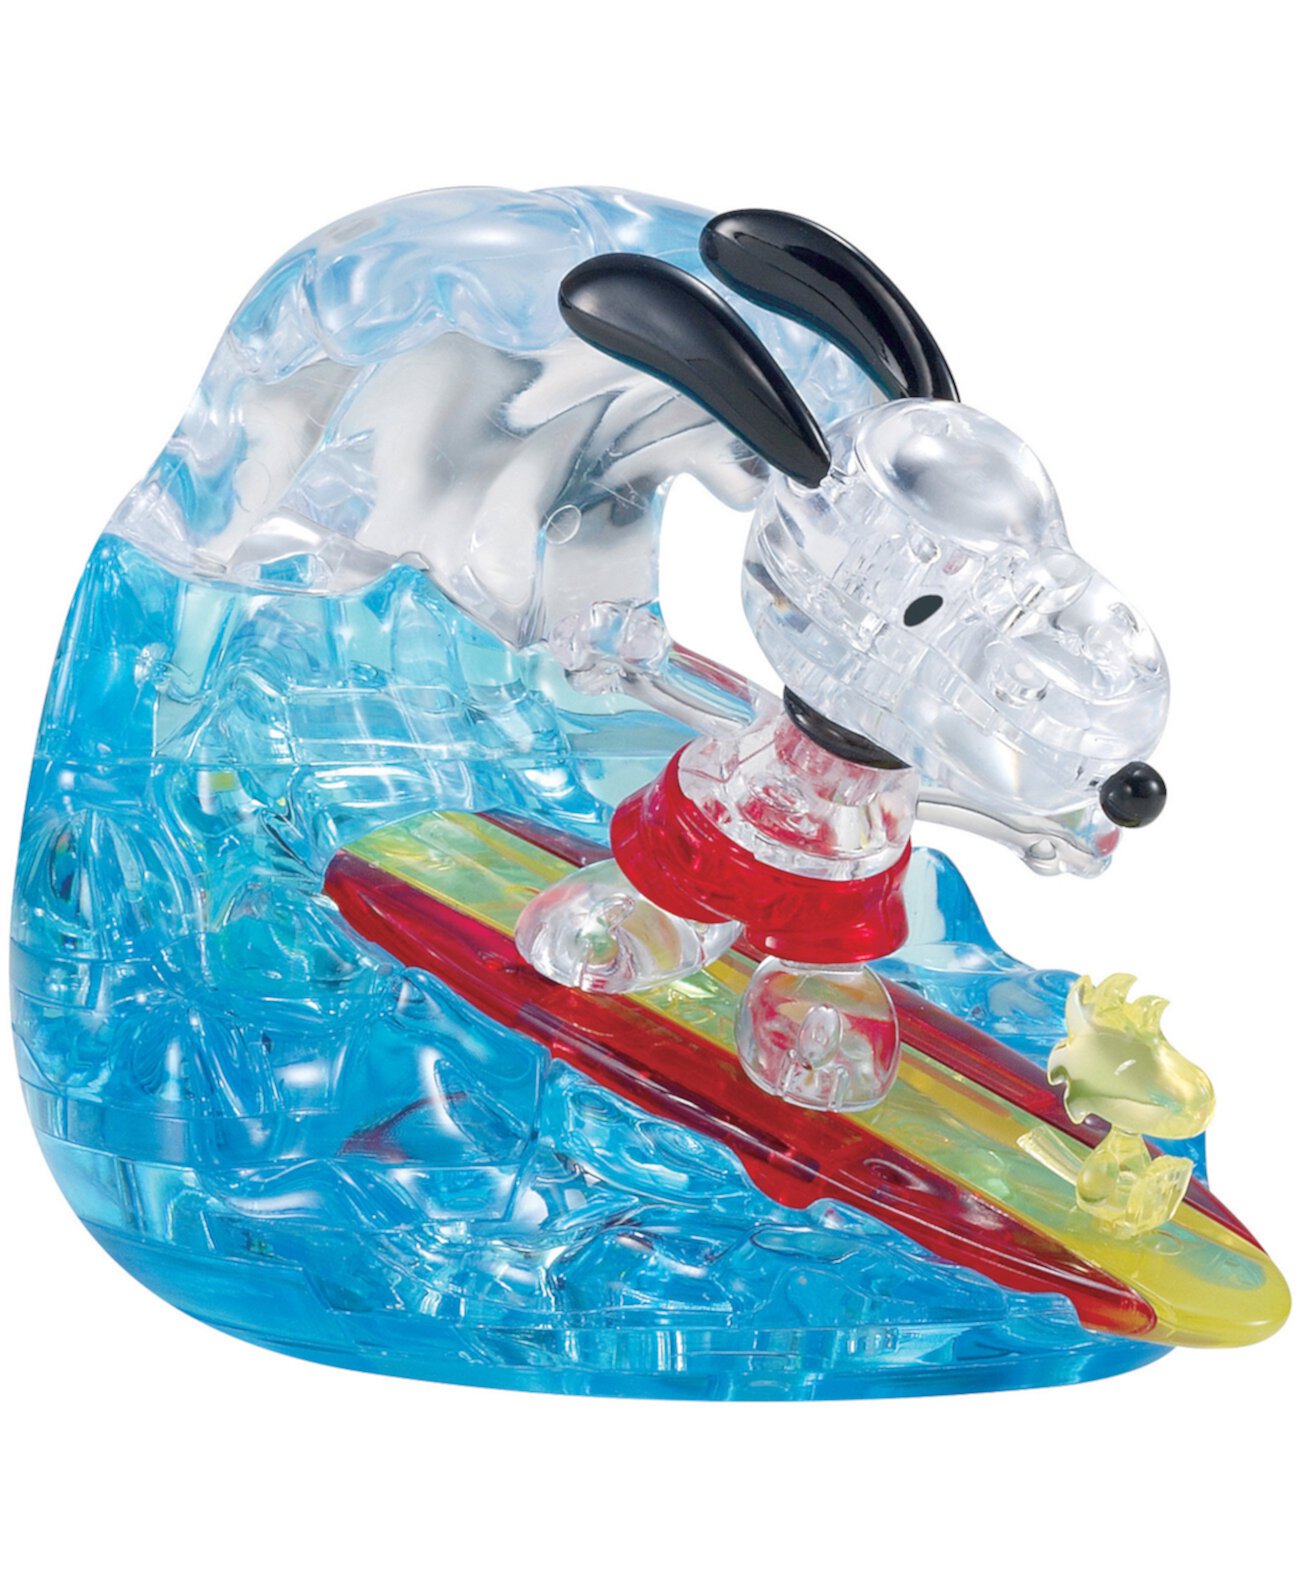 3D-пазл с кристаллами - Peanuts Snoopy Surf - 41 шт. BePuzzled